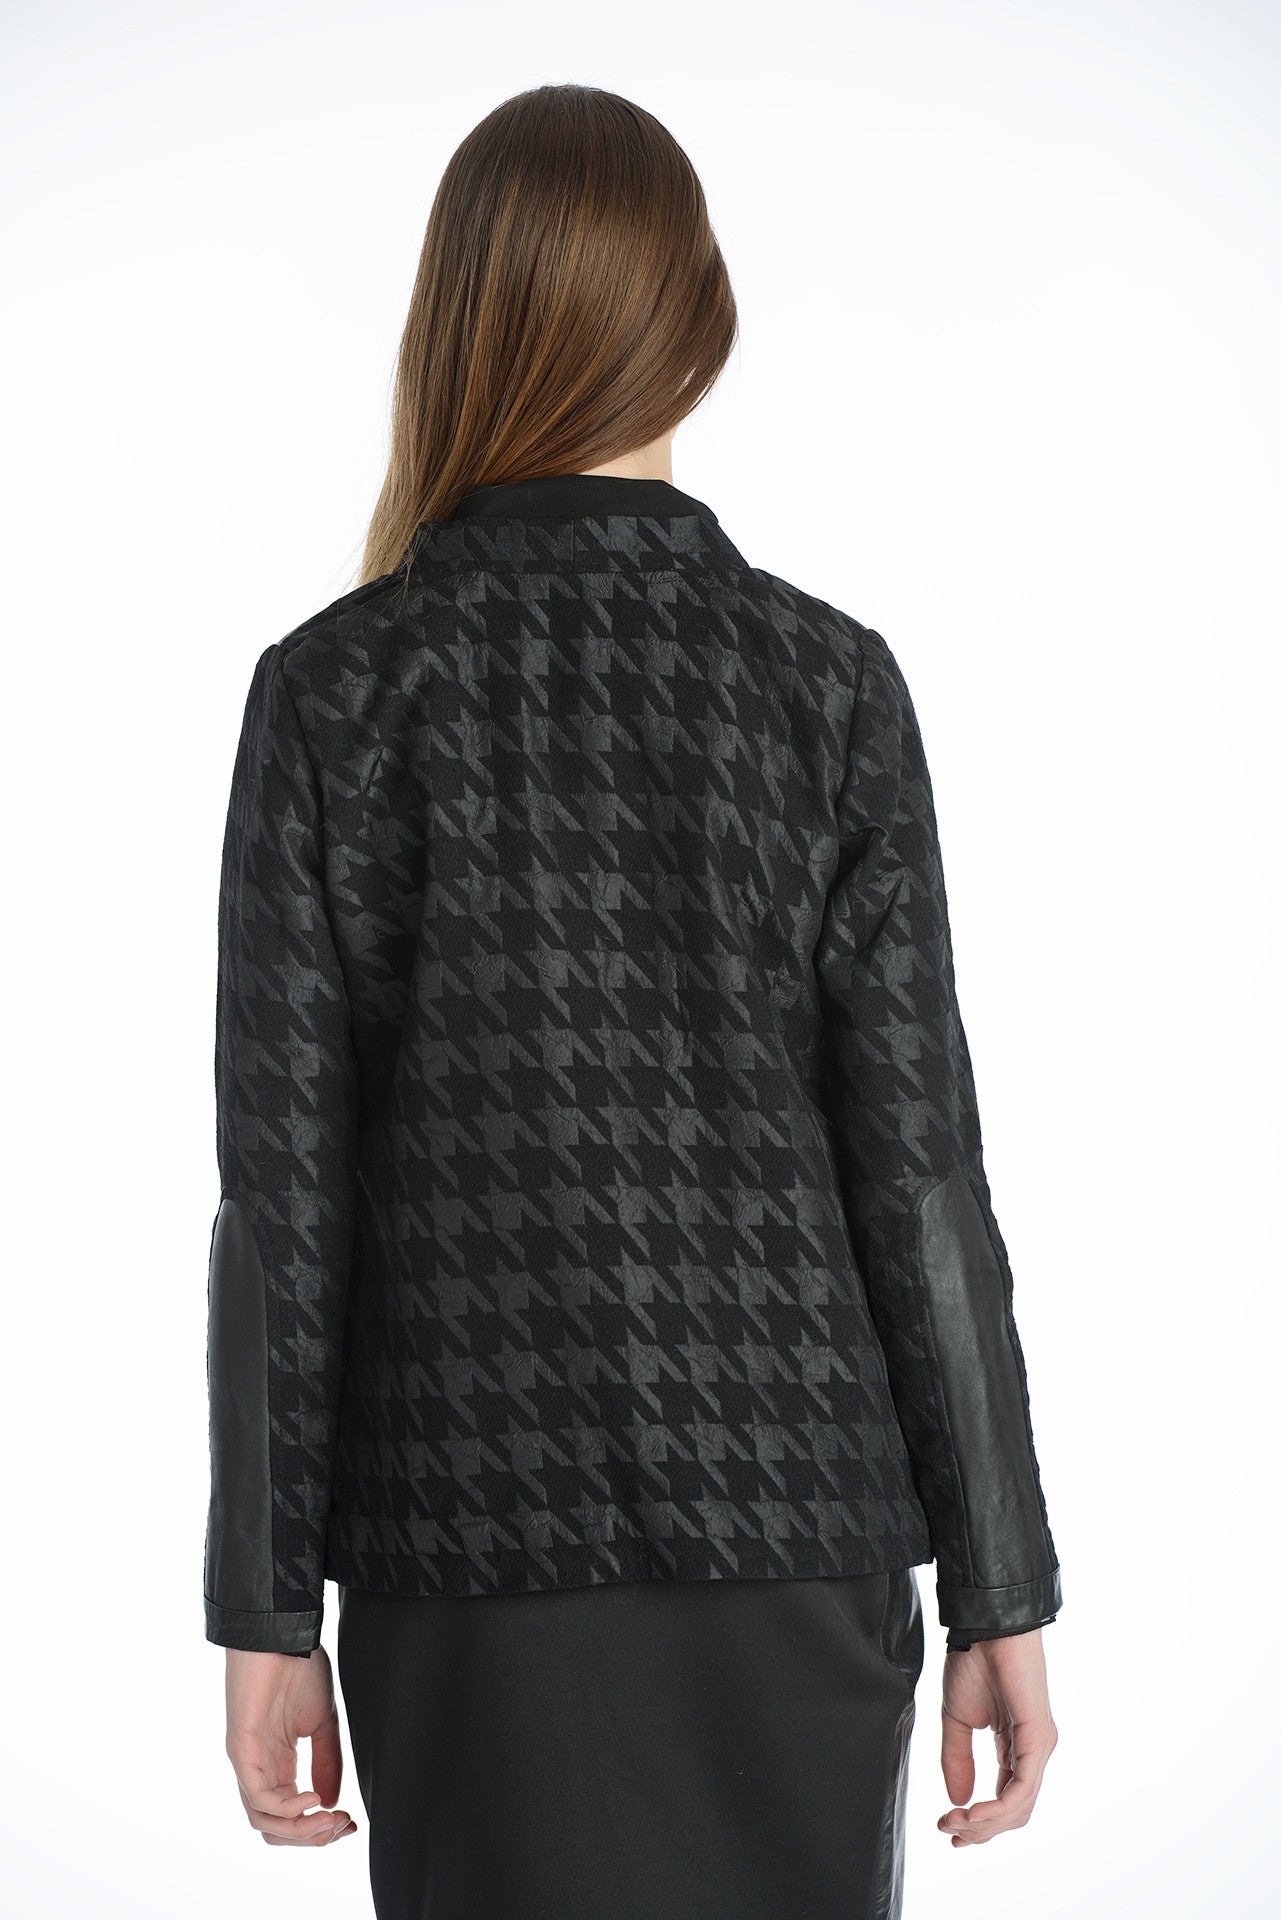 Leather and houndstooth suit jacket